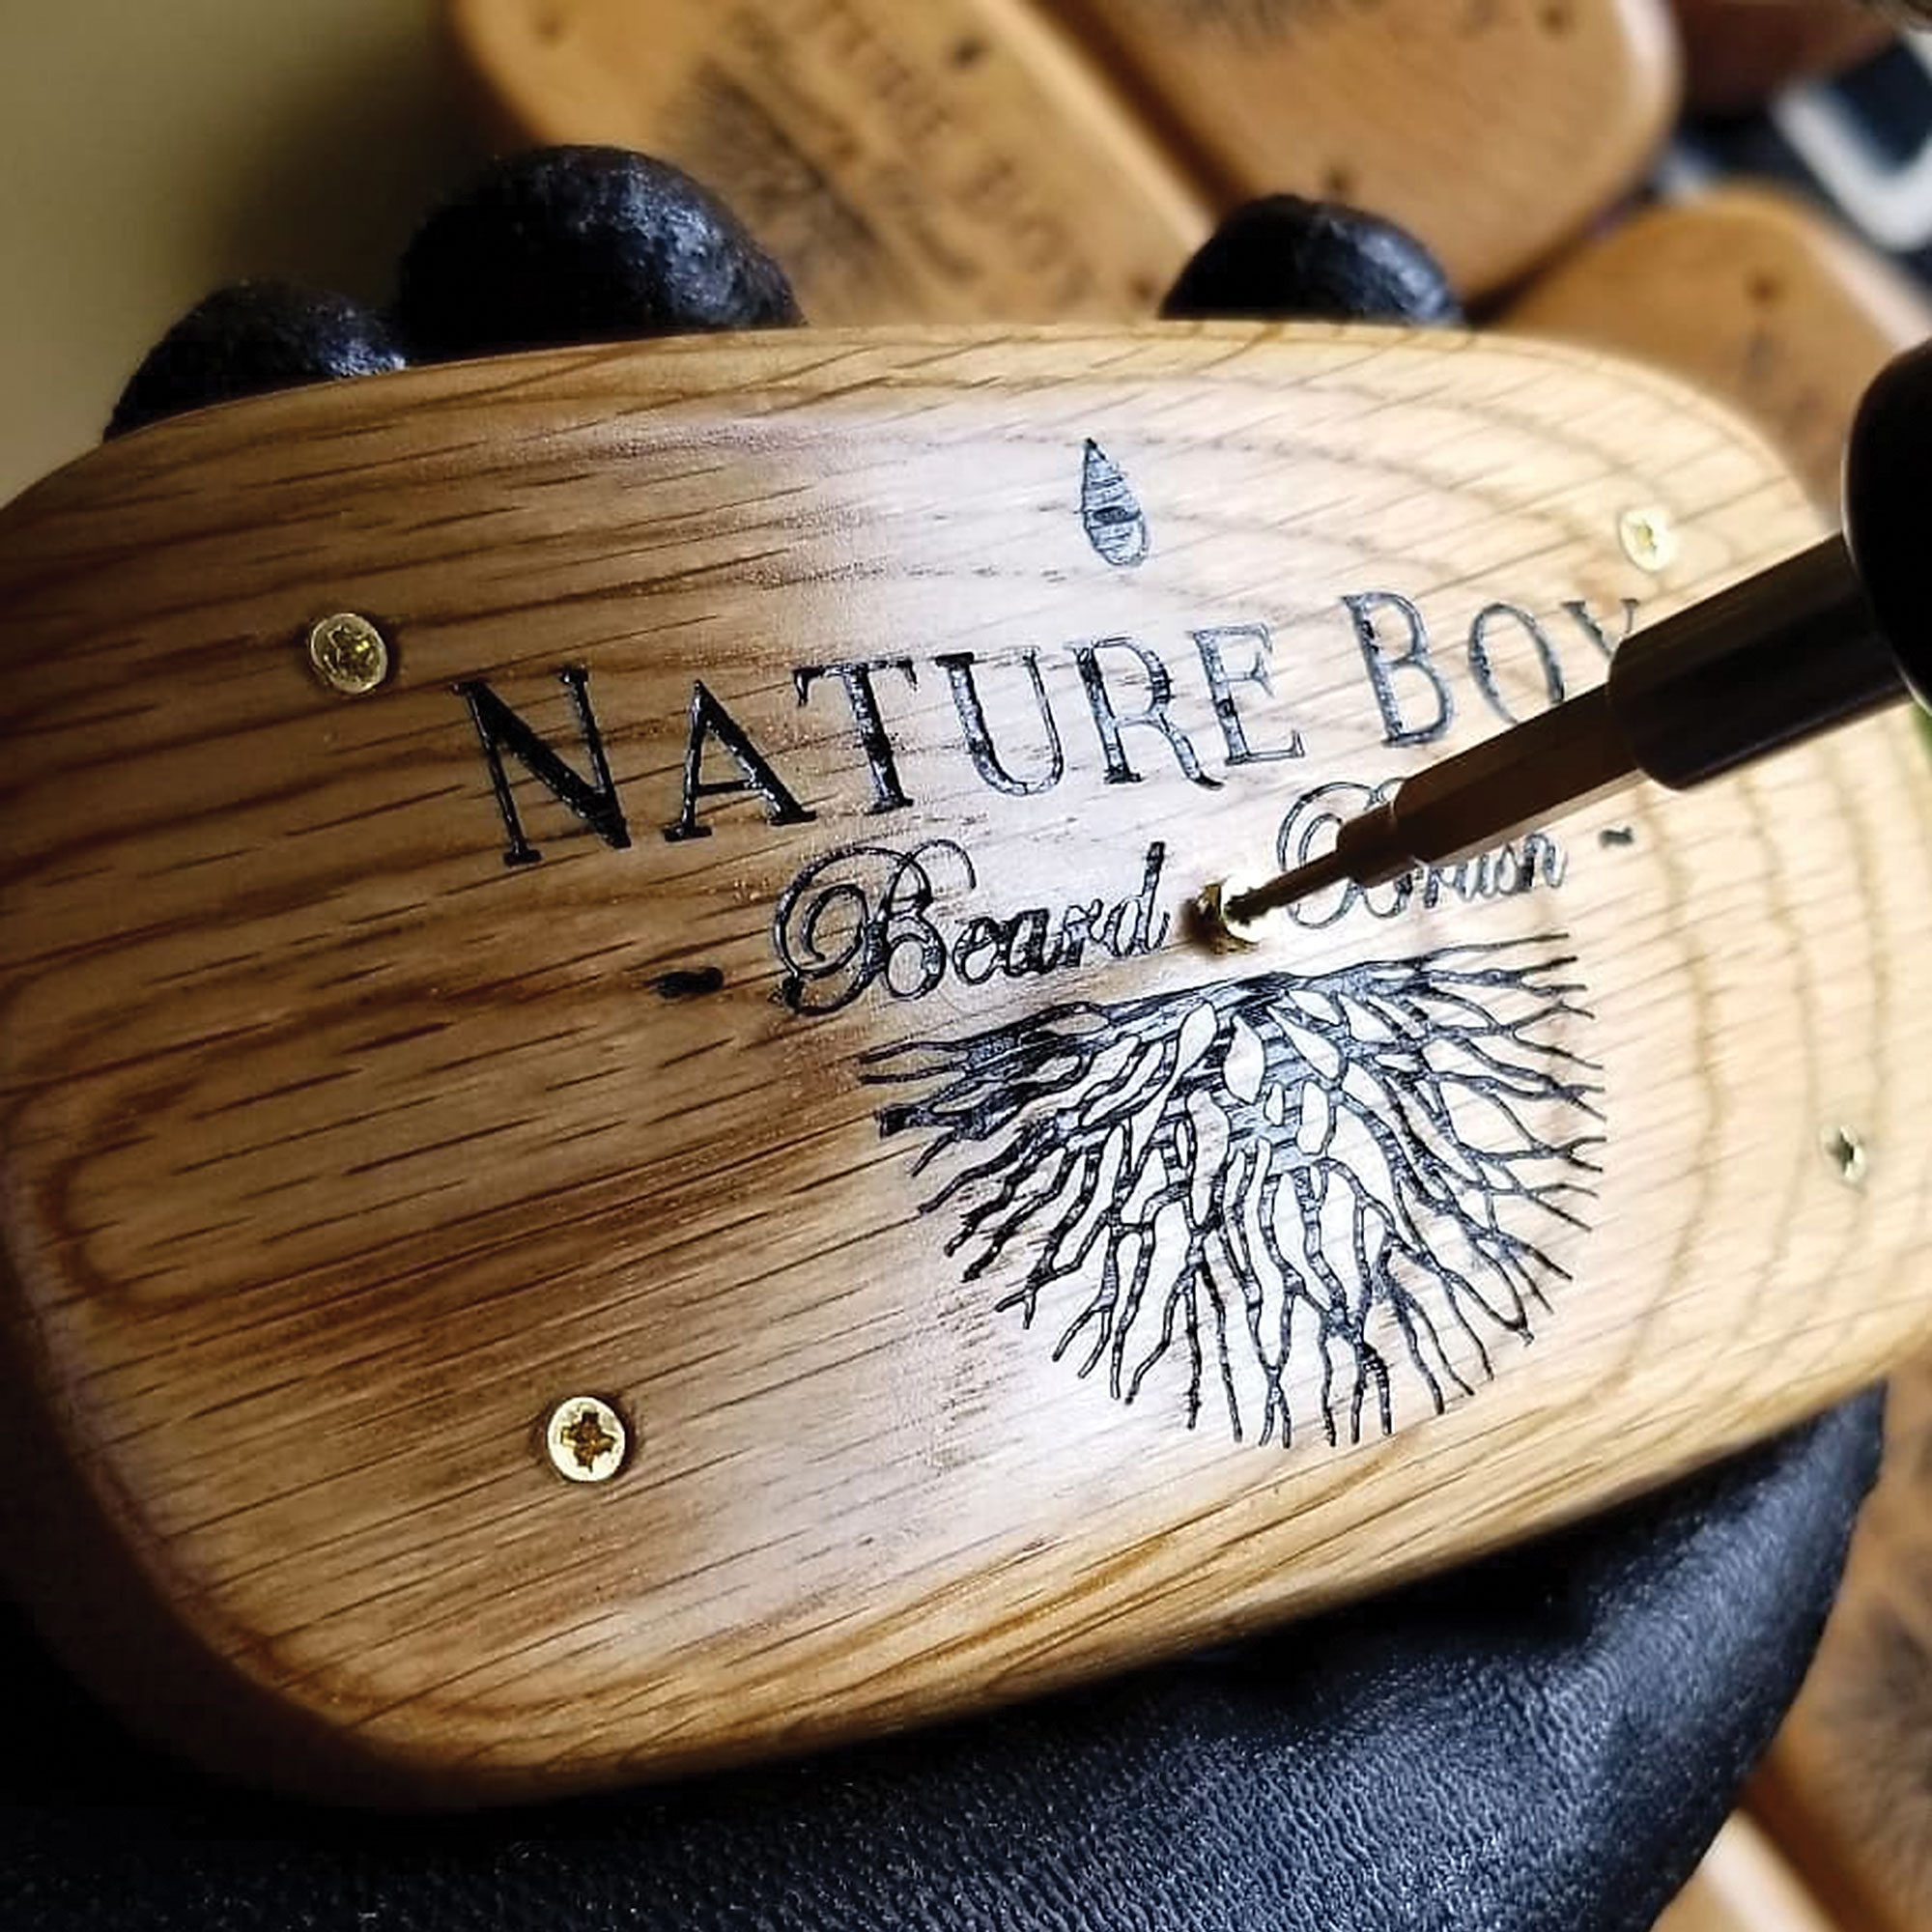 Screw being added to a Nature Boy brush